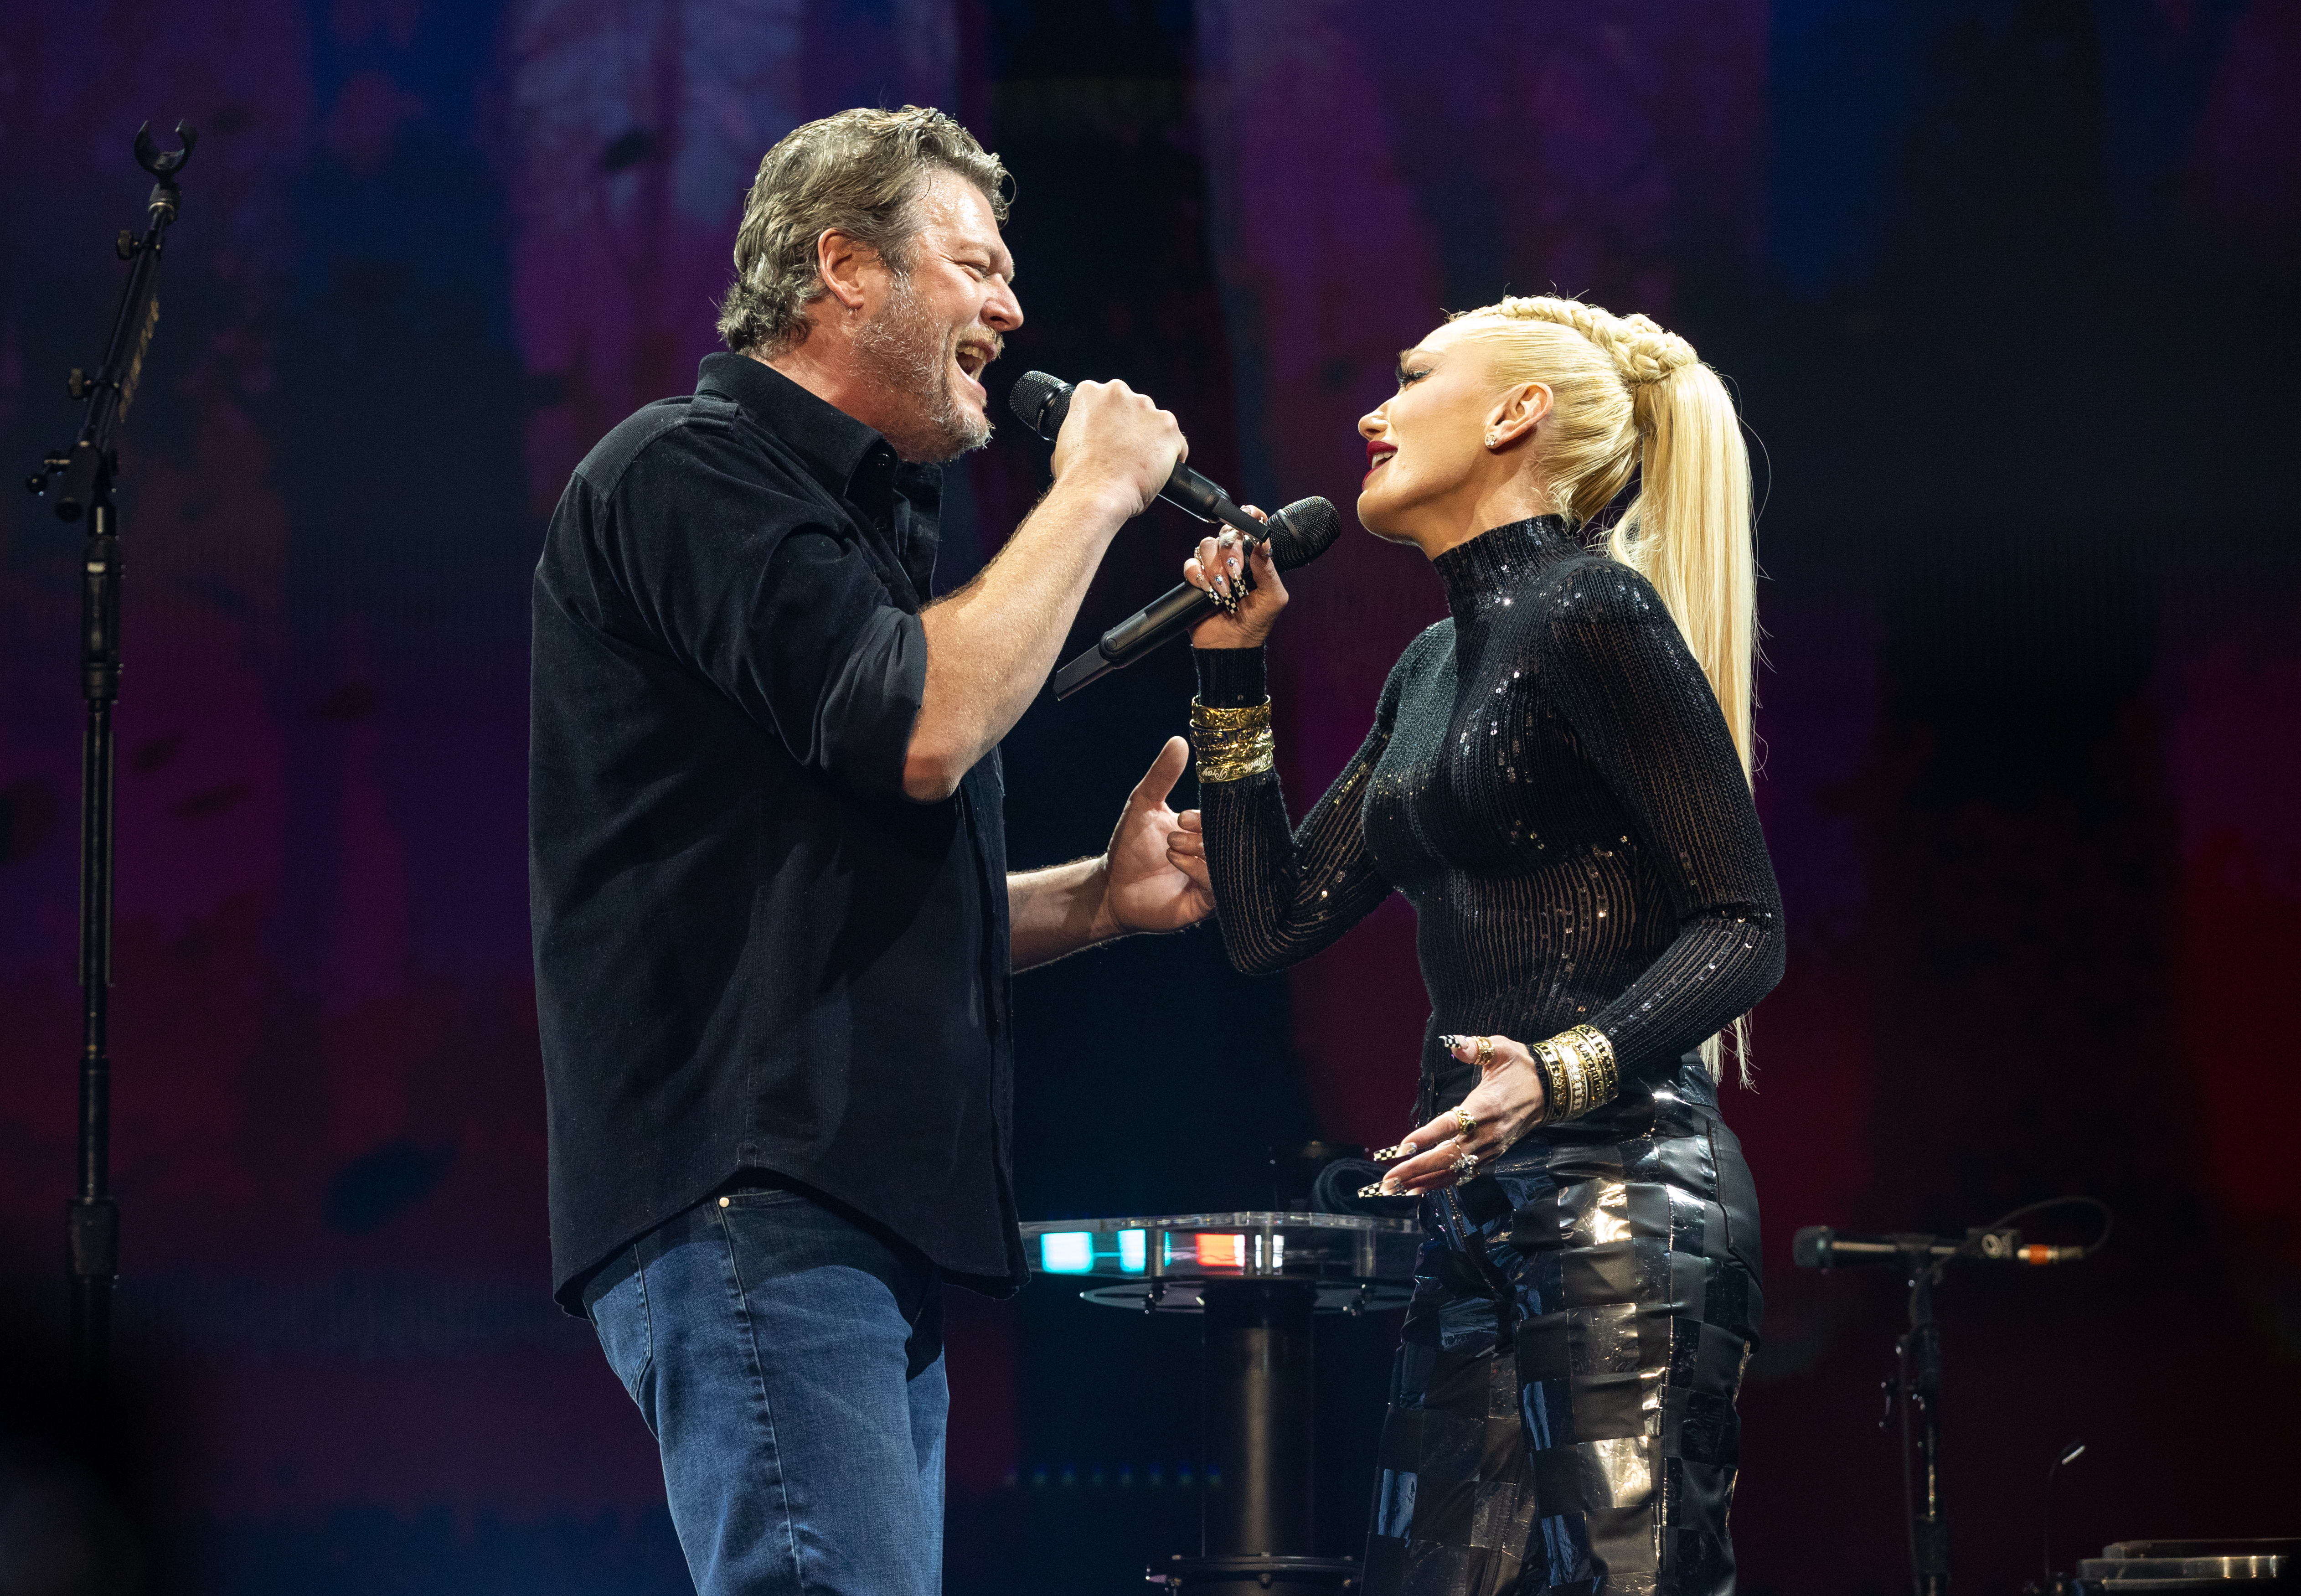 Blake and Gwen recently released a song together that seemed to give insight into their marriage